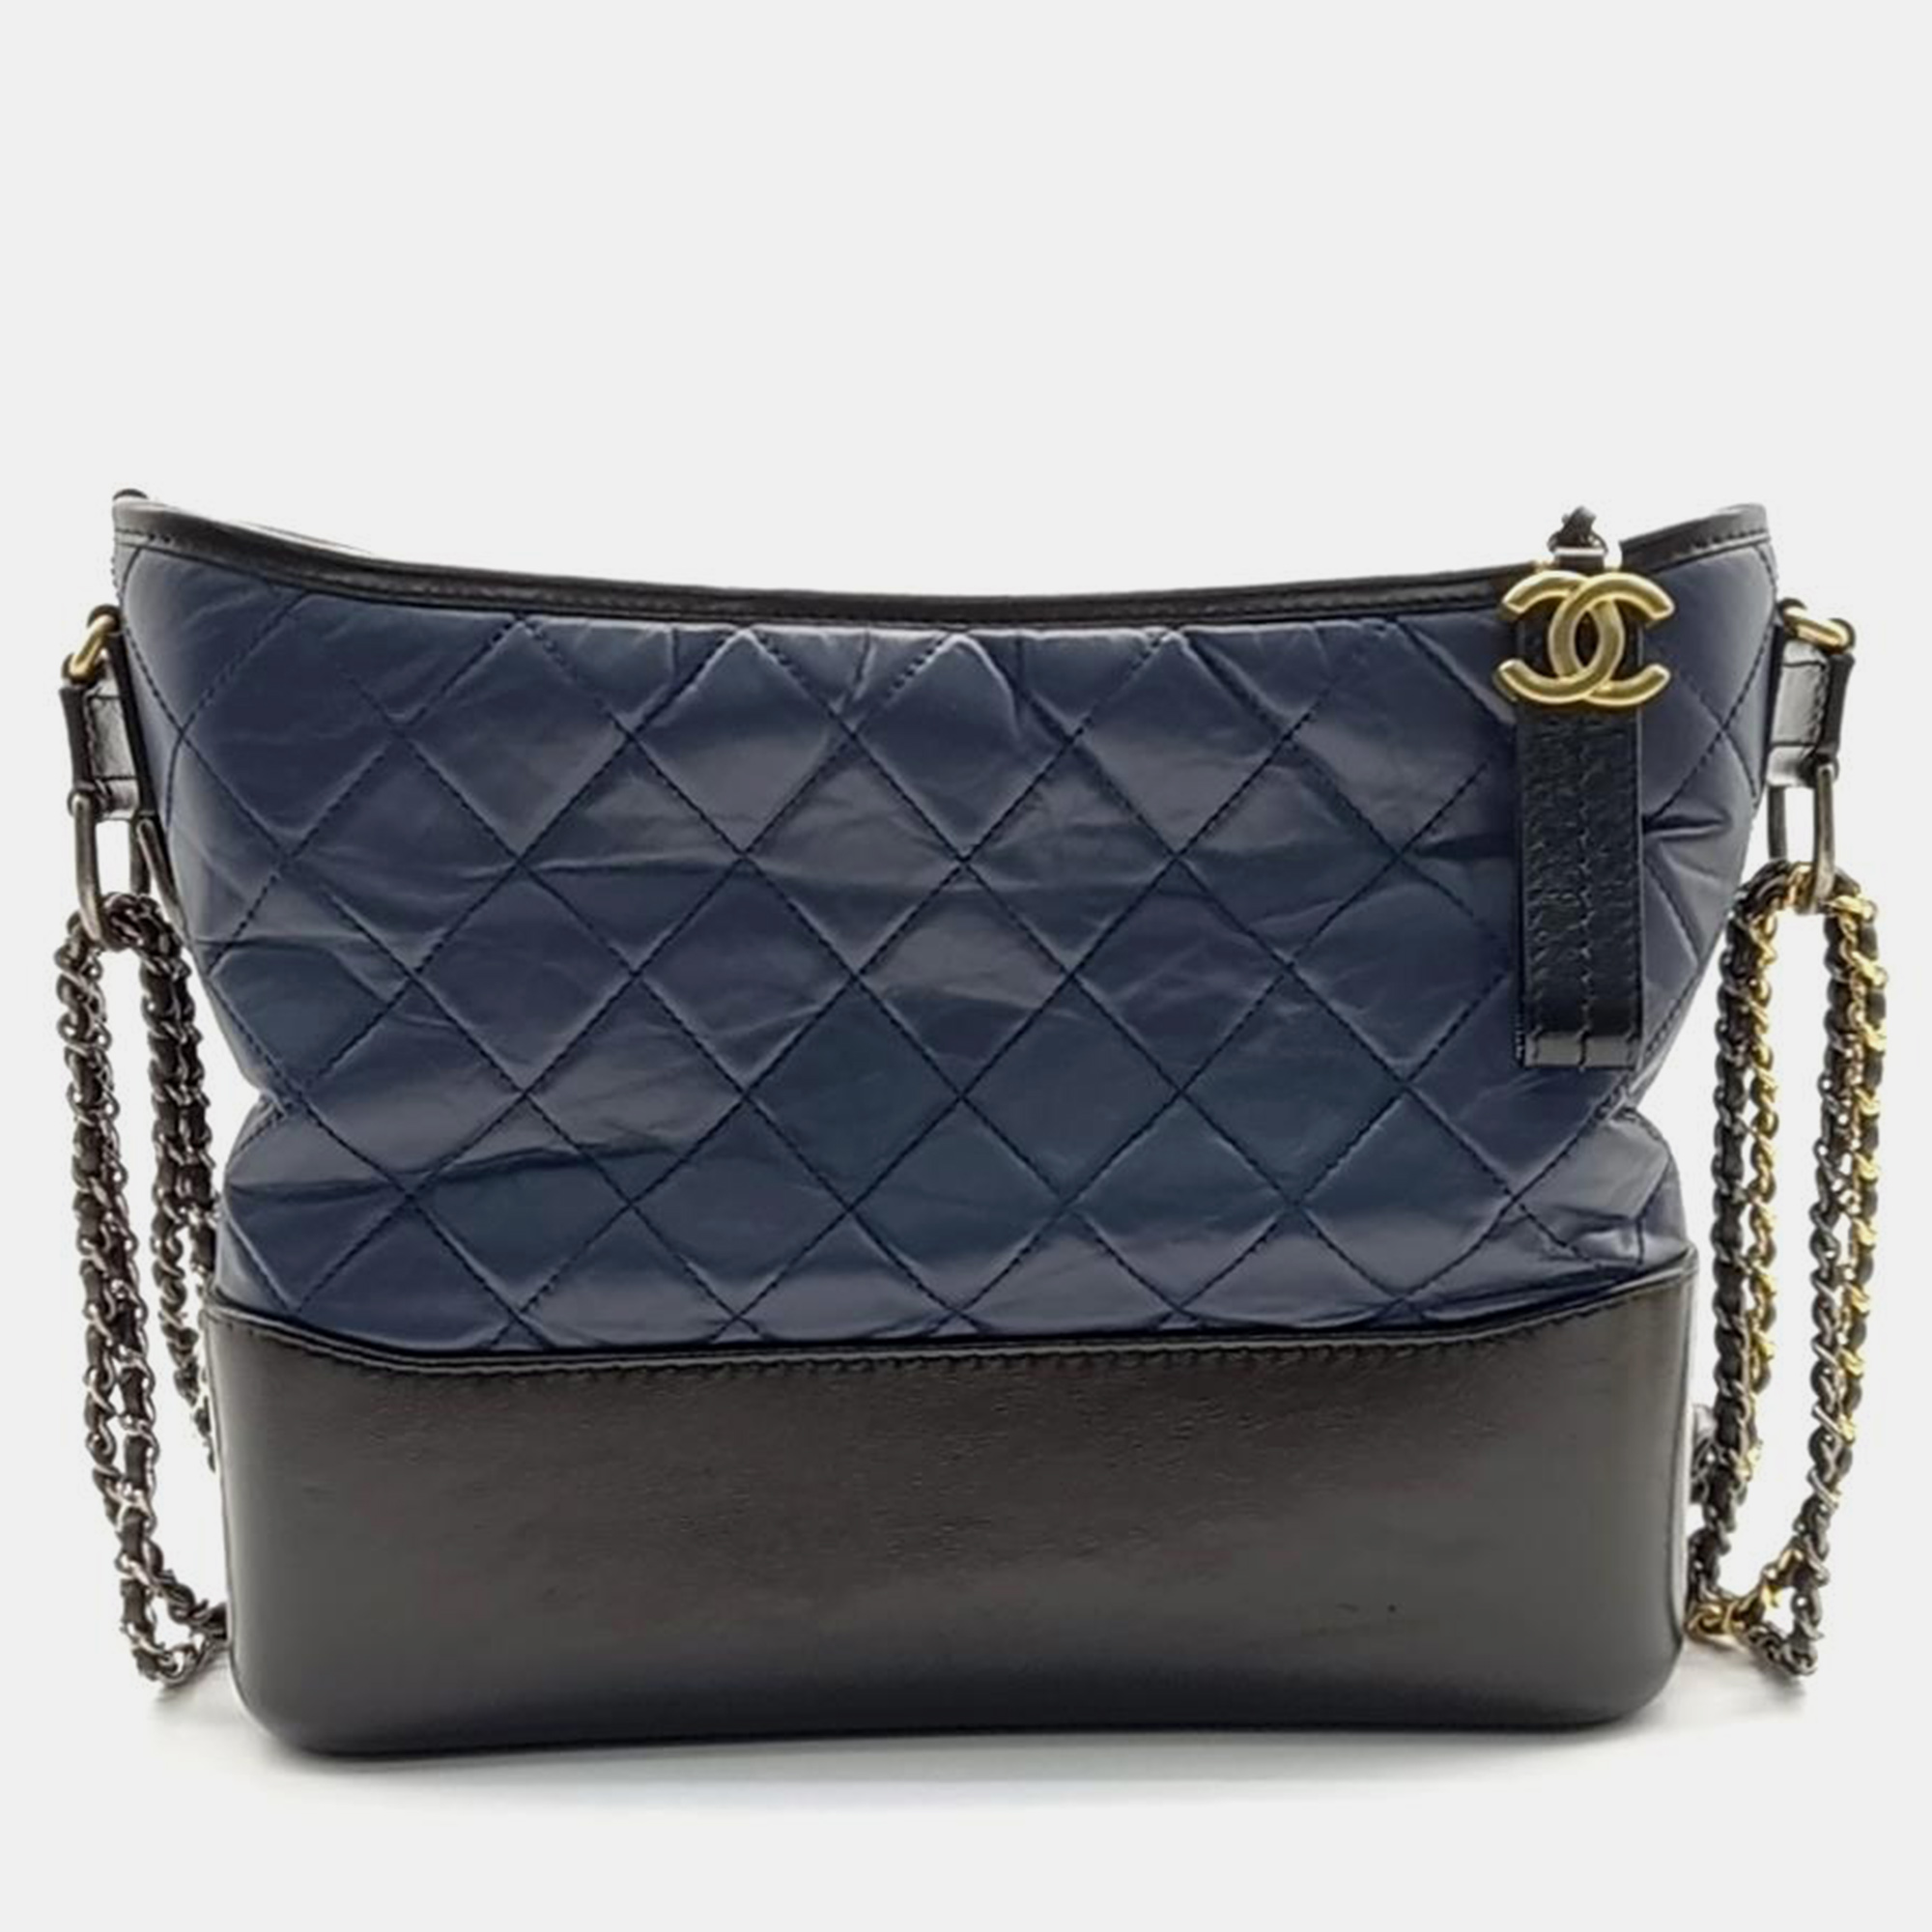 Chanel navy blue and black leather medium gabrielle hobo bag